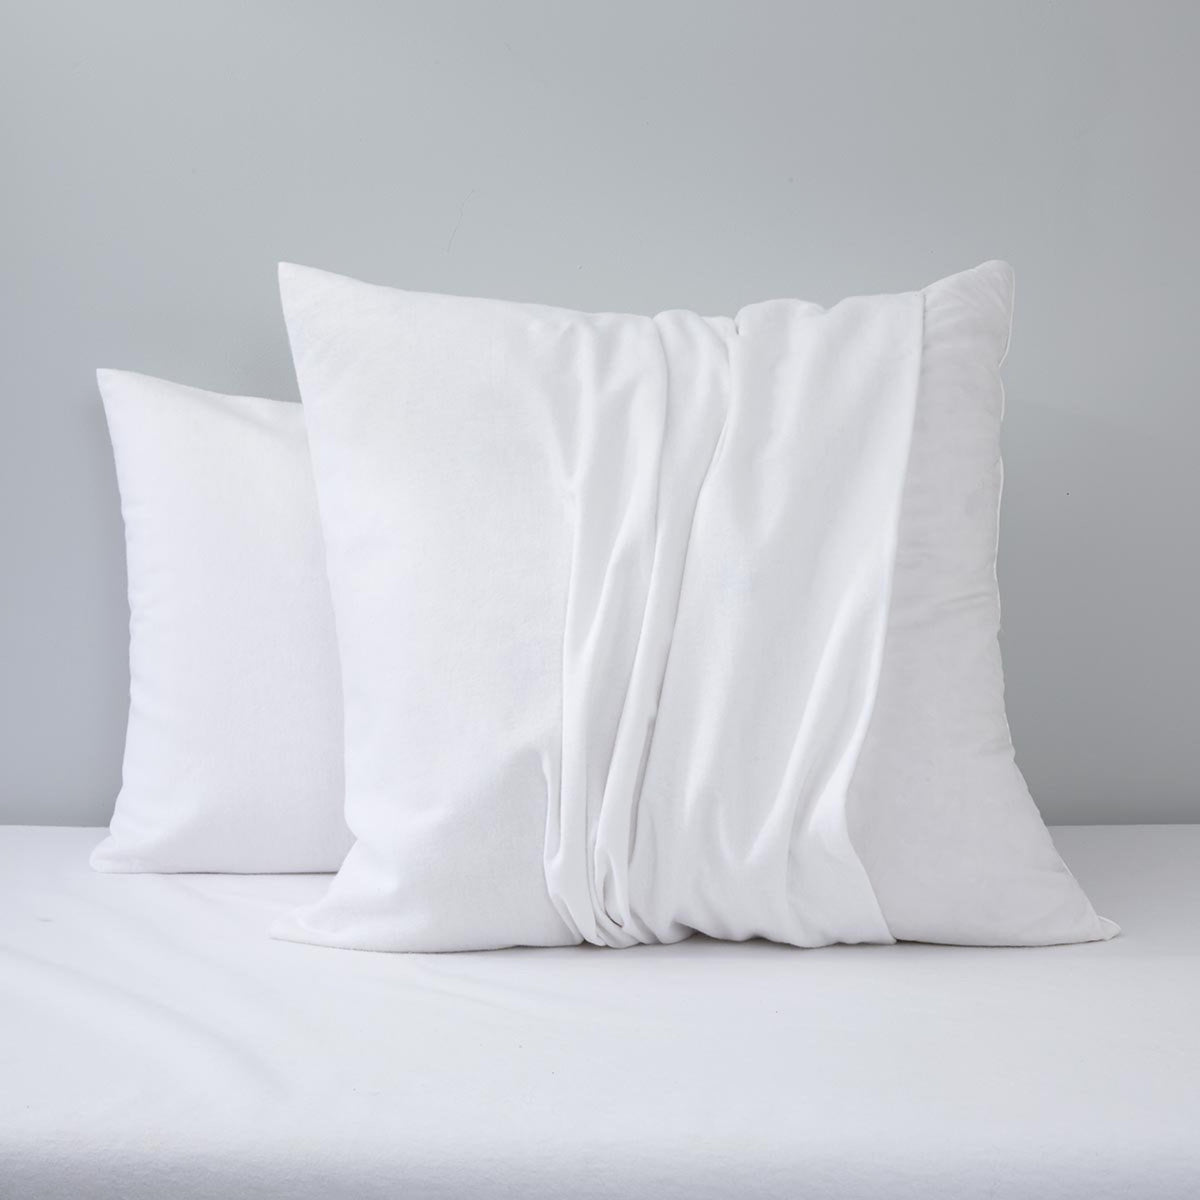 Two White Yves Delorme Pillow Protector on Bedding